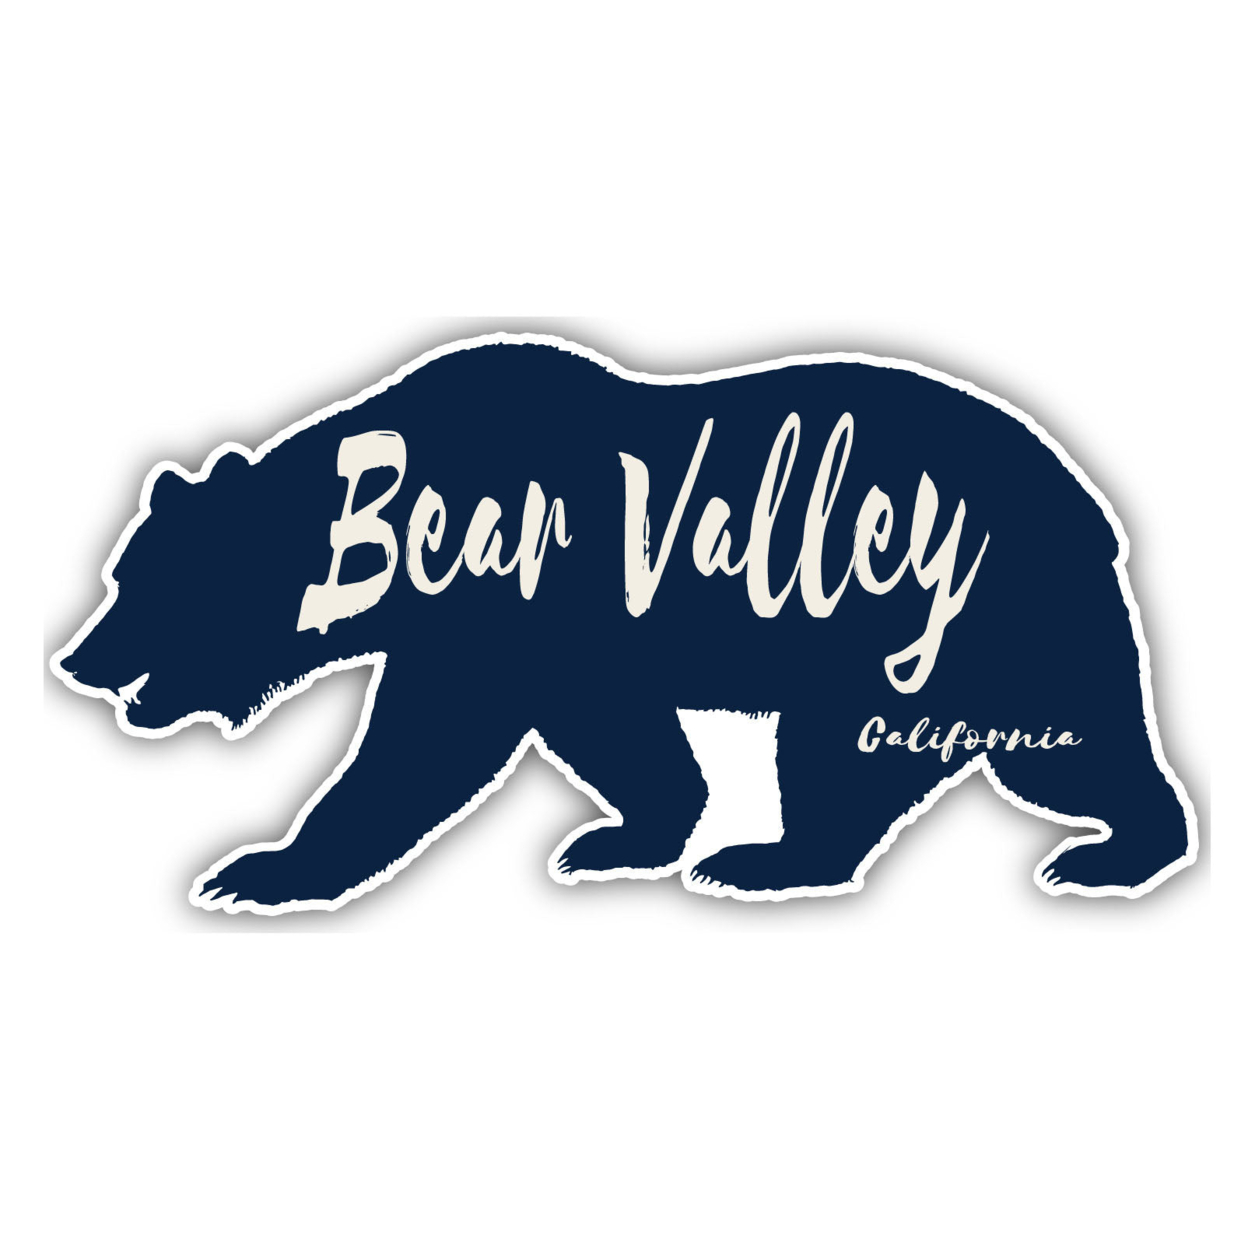 Bear Valley California Souvenir Decorative Stickers (Choose Theme And Size) - 4-Pack, 10-Inch, Great Outdoors